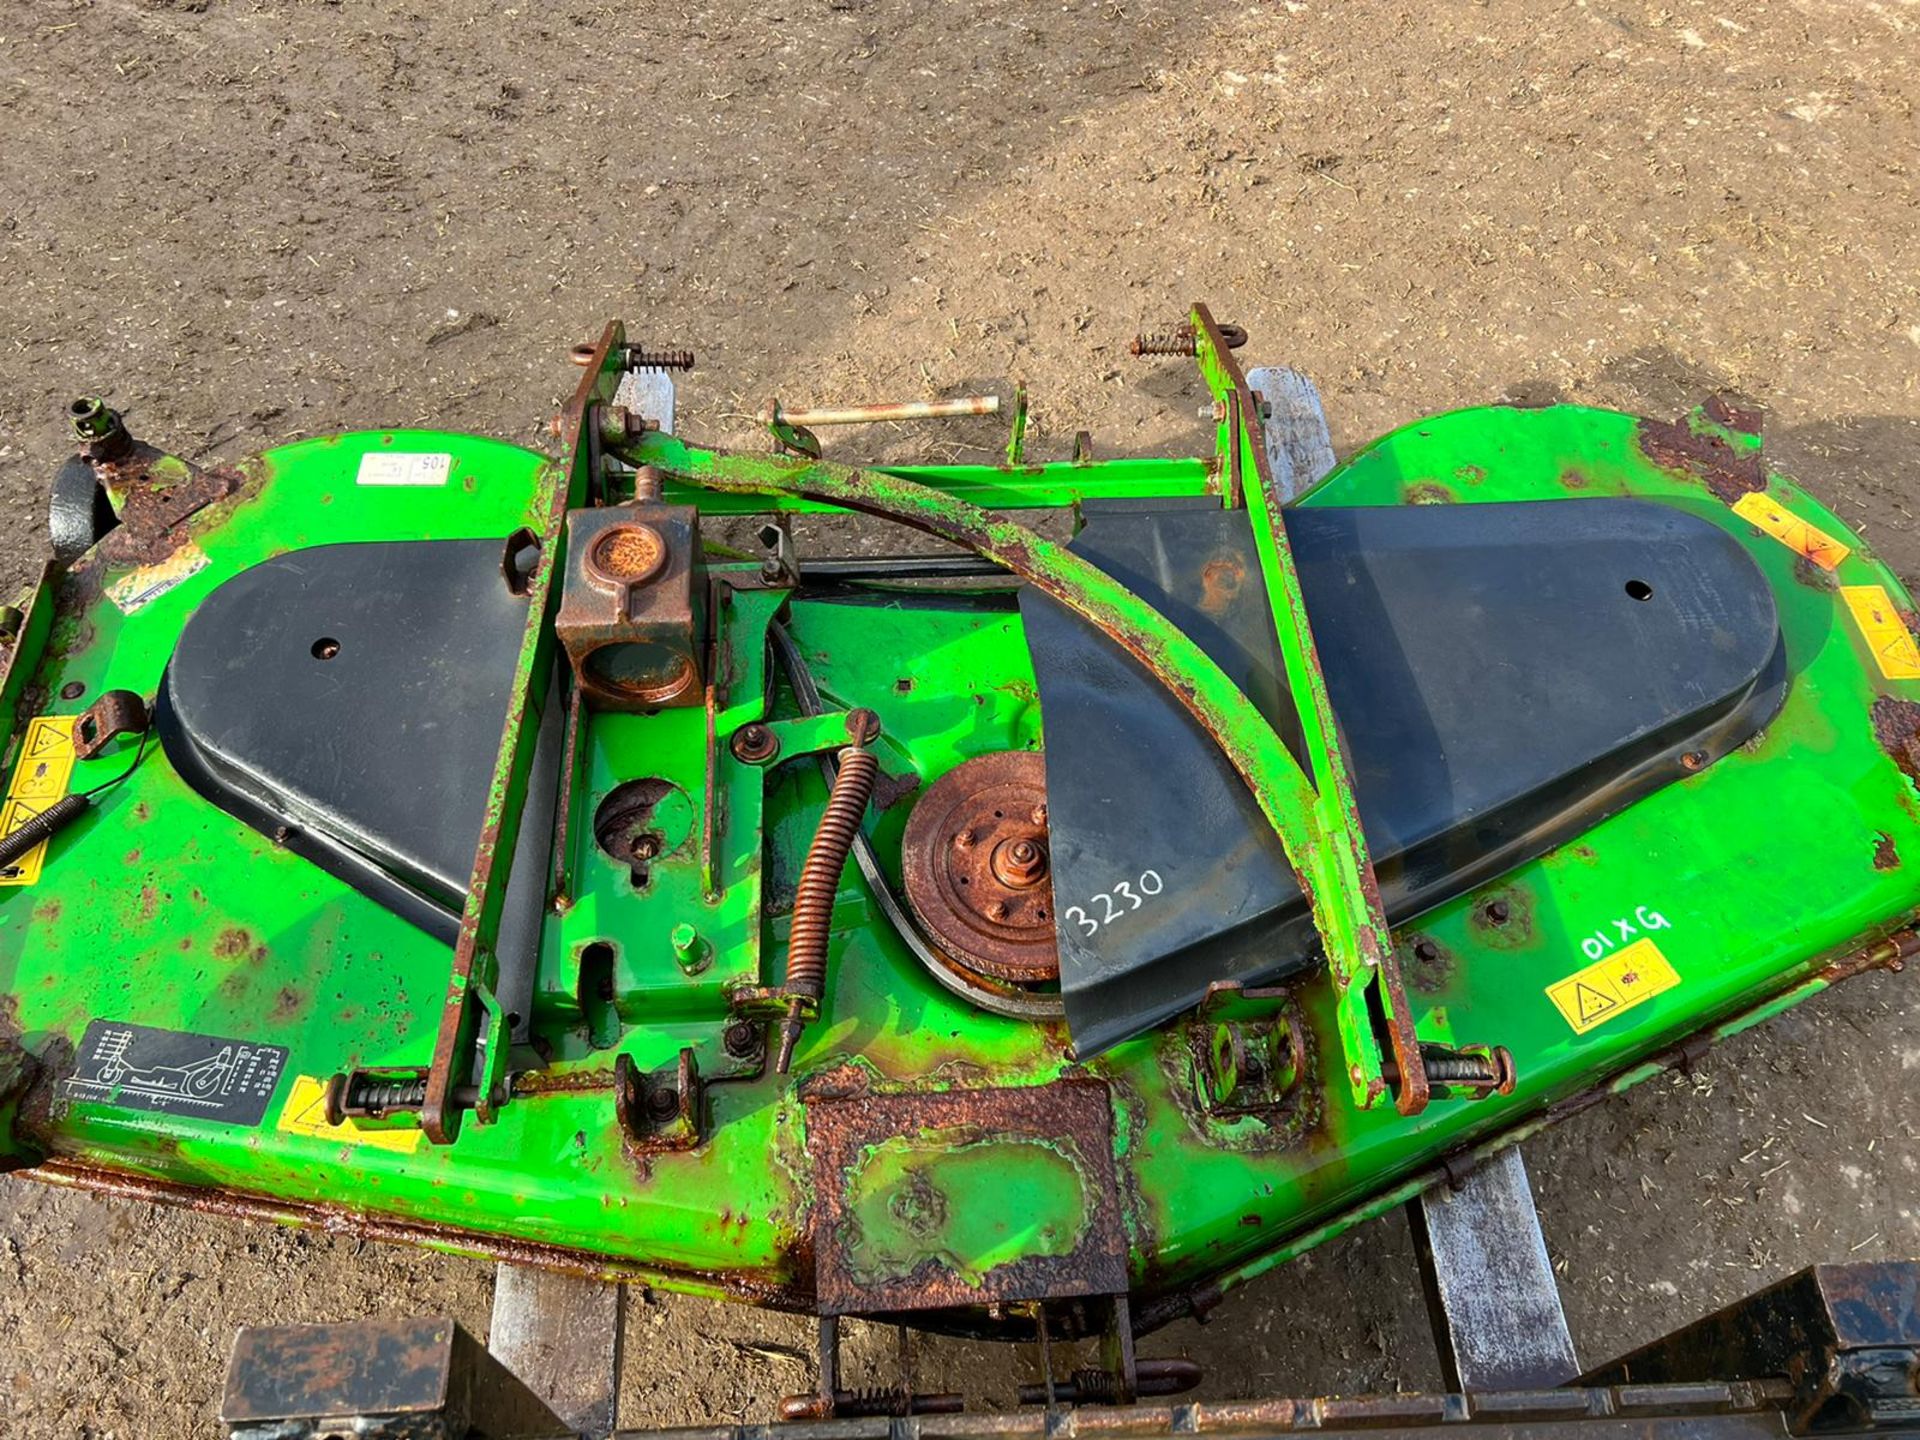 2010 JOHN DEERE 72" MID MOUNTED TRACTOR ROTARY DECK, GOOD SOLID TRIPLE BLADED BECK, WEIGHT 199kg - Image 7 of 12